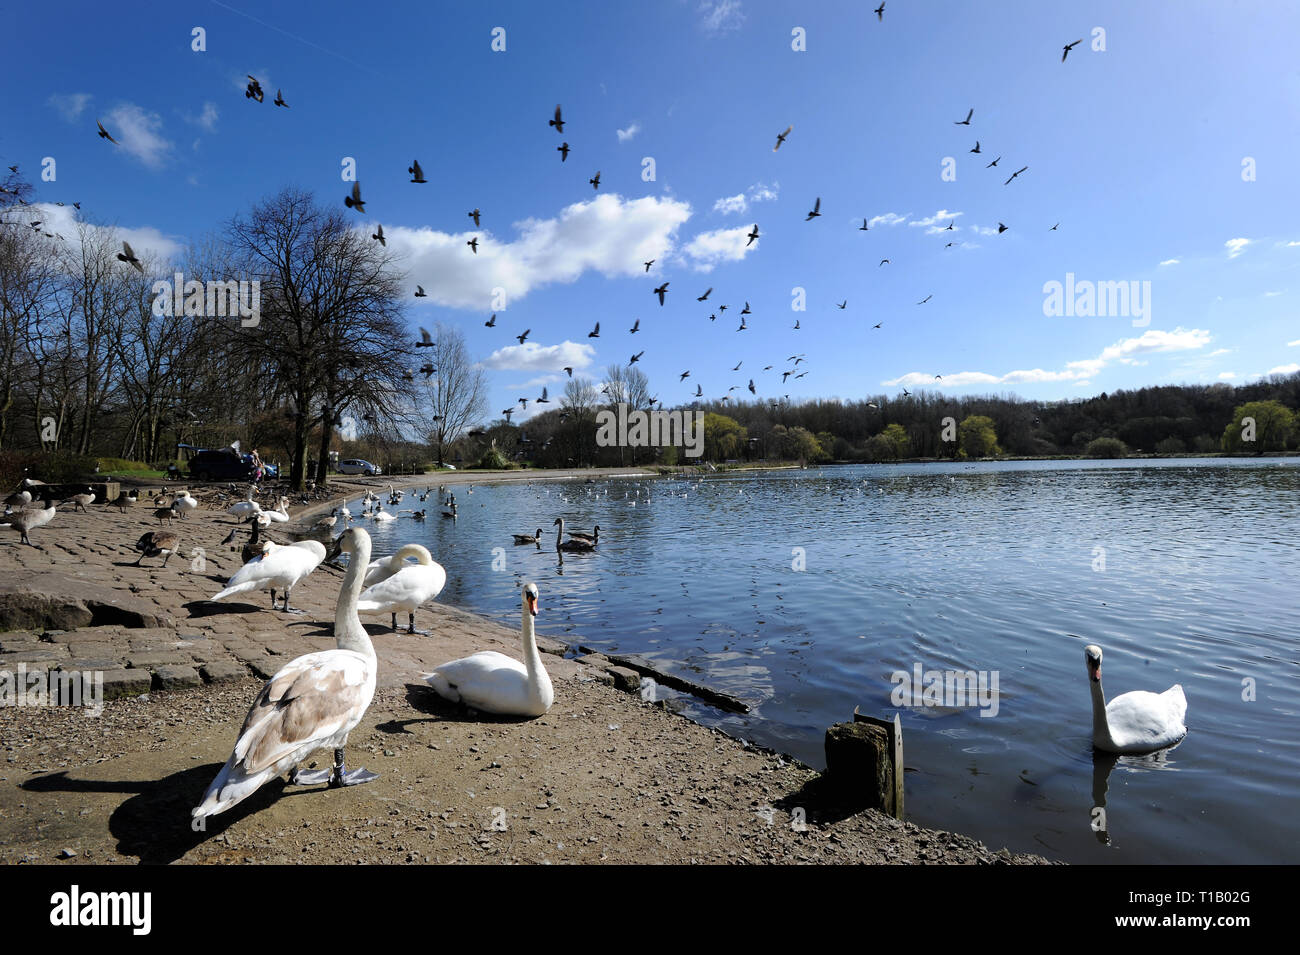 swanBolton, Lancashire, UK. 25th March, 2019. Glorious Spring sunshine this afternoon brought the crowds out to Moses Gate Country Park, Bolton, Lancashire. A perfect start to the week as blue skies and warm sunshine are expected to continue until the weekend in the North West of England. Swans and other birds bask in the sunshine. Picture by Credit: Paul Heyes/Alamy Live News Stock Photo